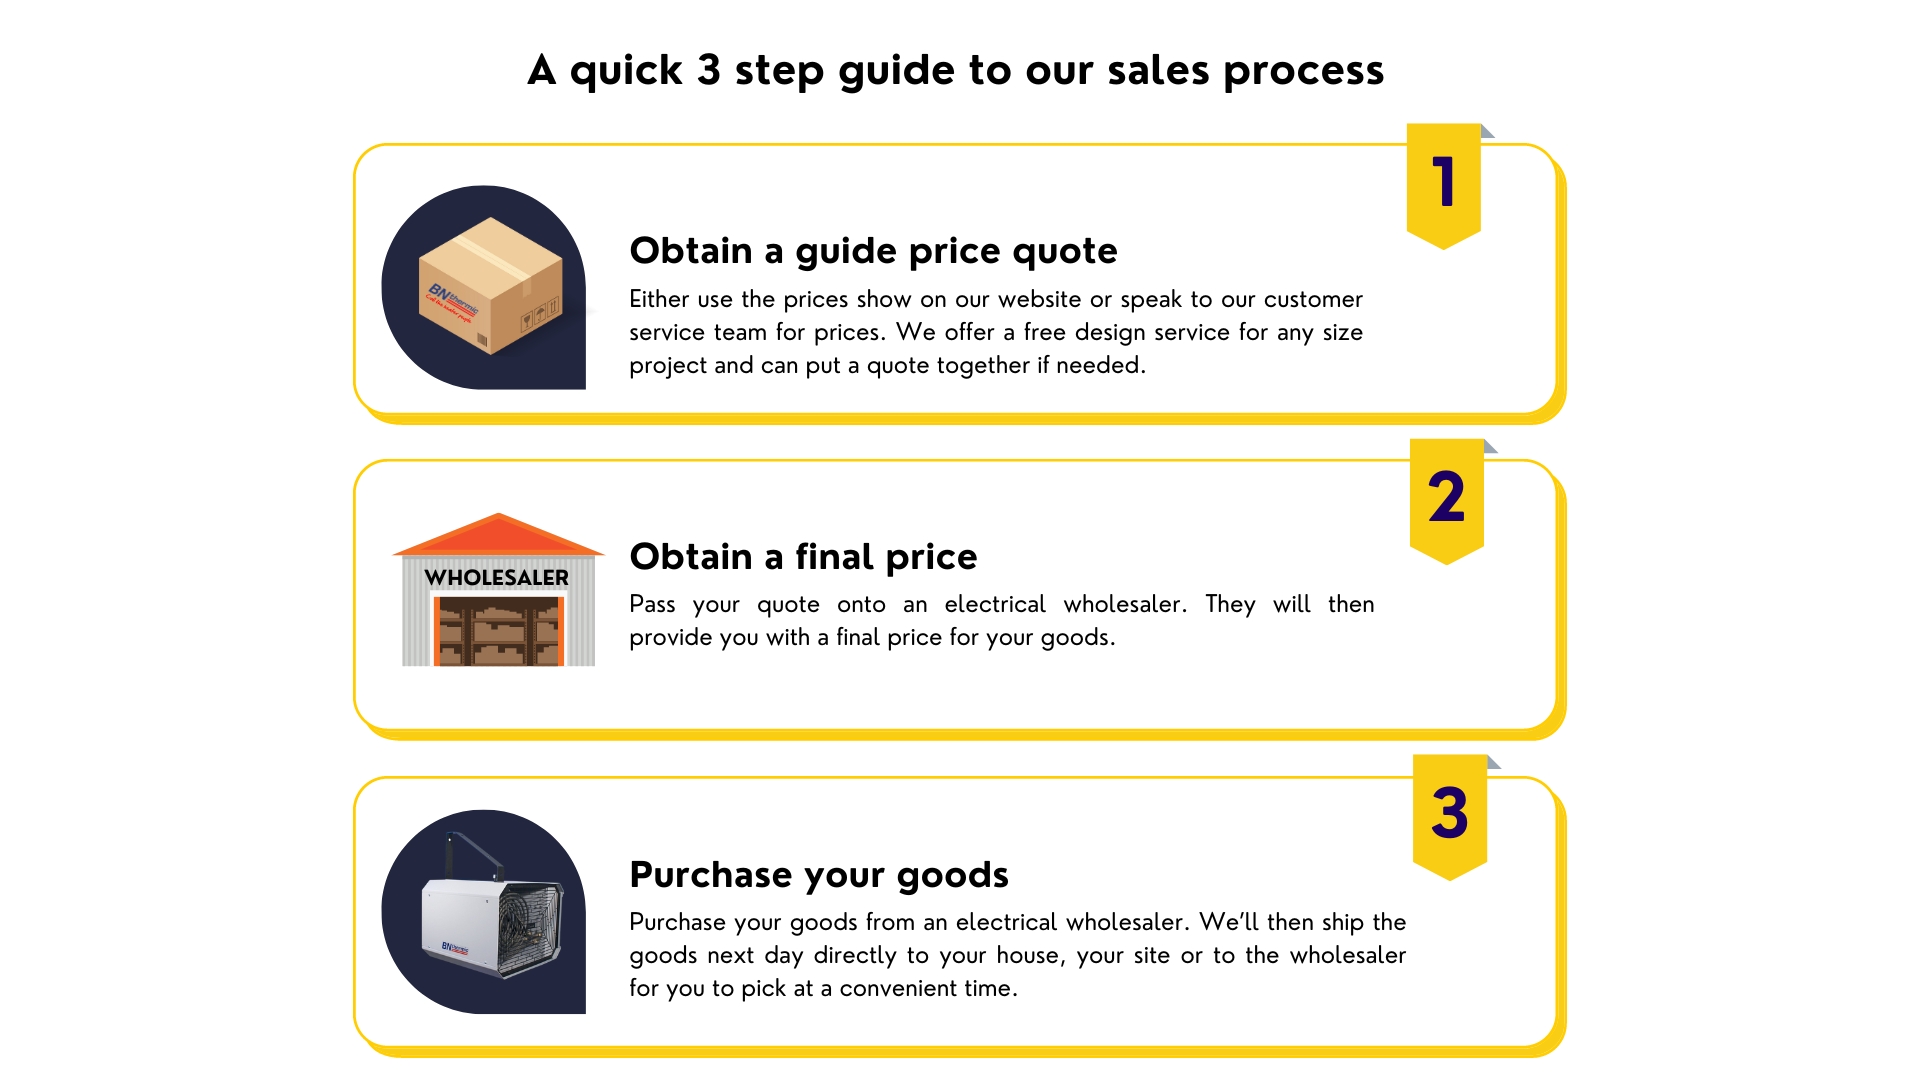 A quick 3 step guide to our sales process